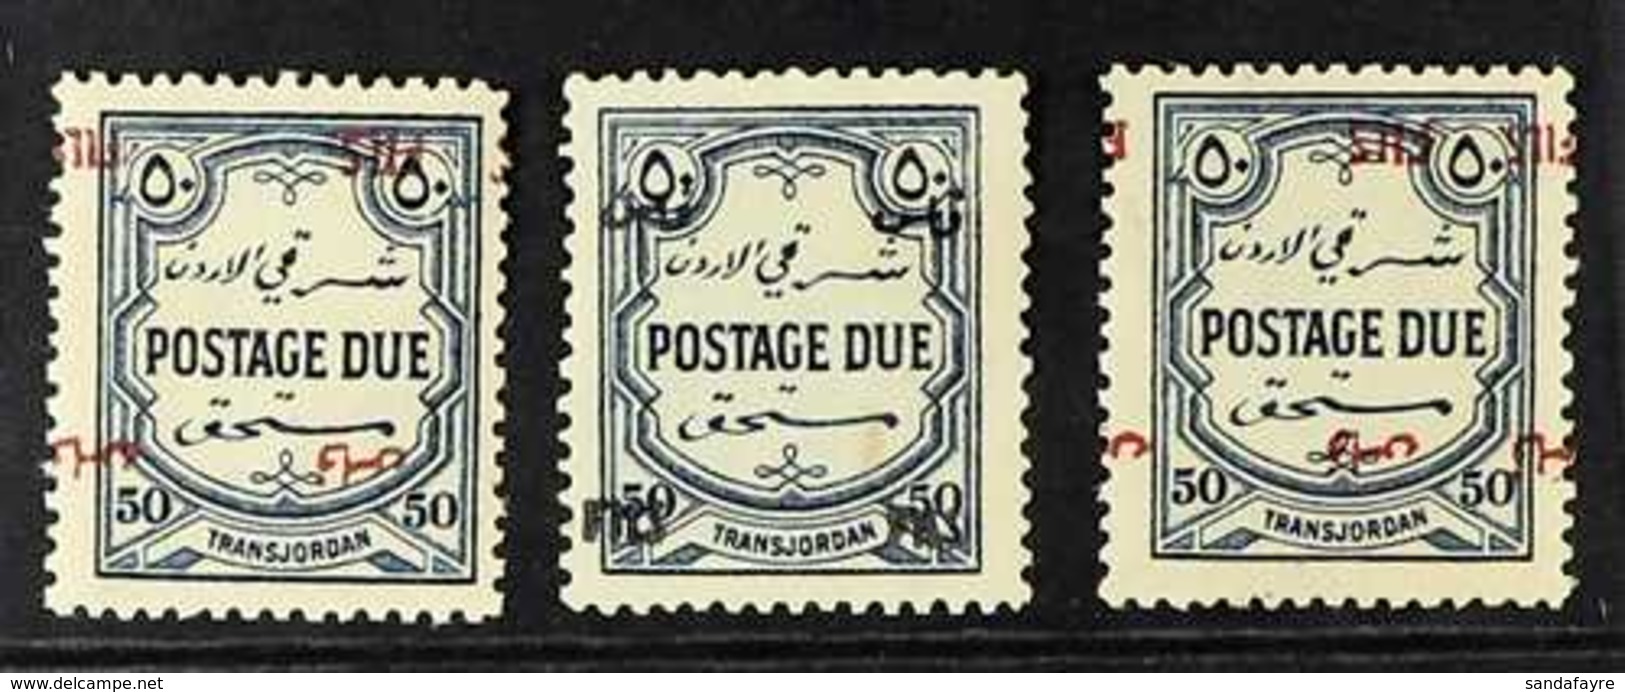 POSTAGE DUE 1952 50f On 50m Overprint Varieties With Opt Inverted (SG D346a) Mint, Opt In Black (SG D346b) NHM, Plus Opt - Jordan